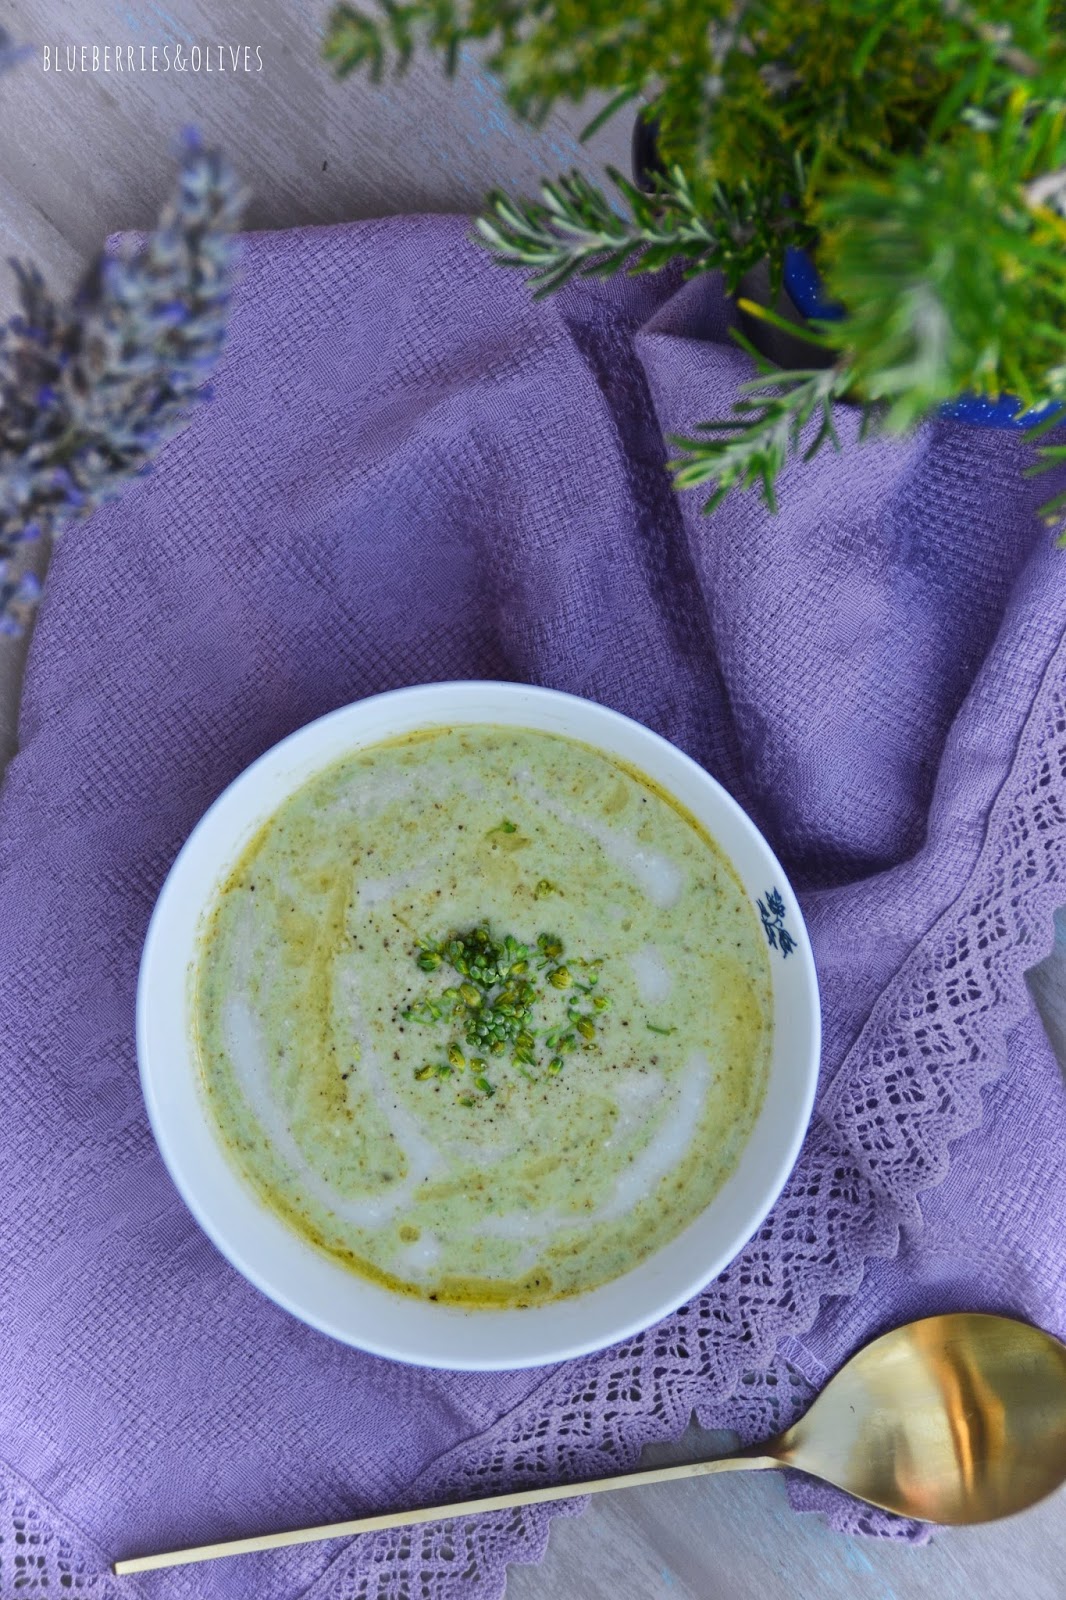 BROCCOLINI, ALMOND AND ROSEMARY CHILLED SOUP